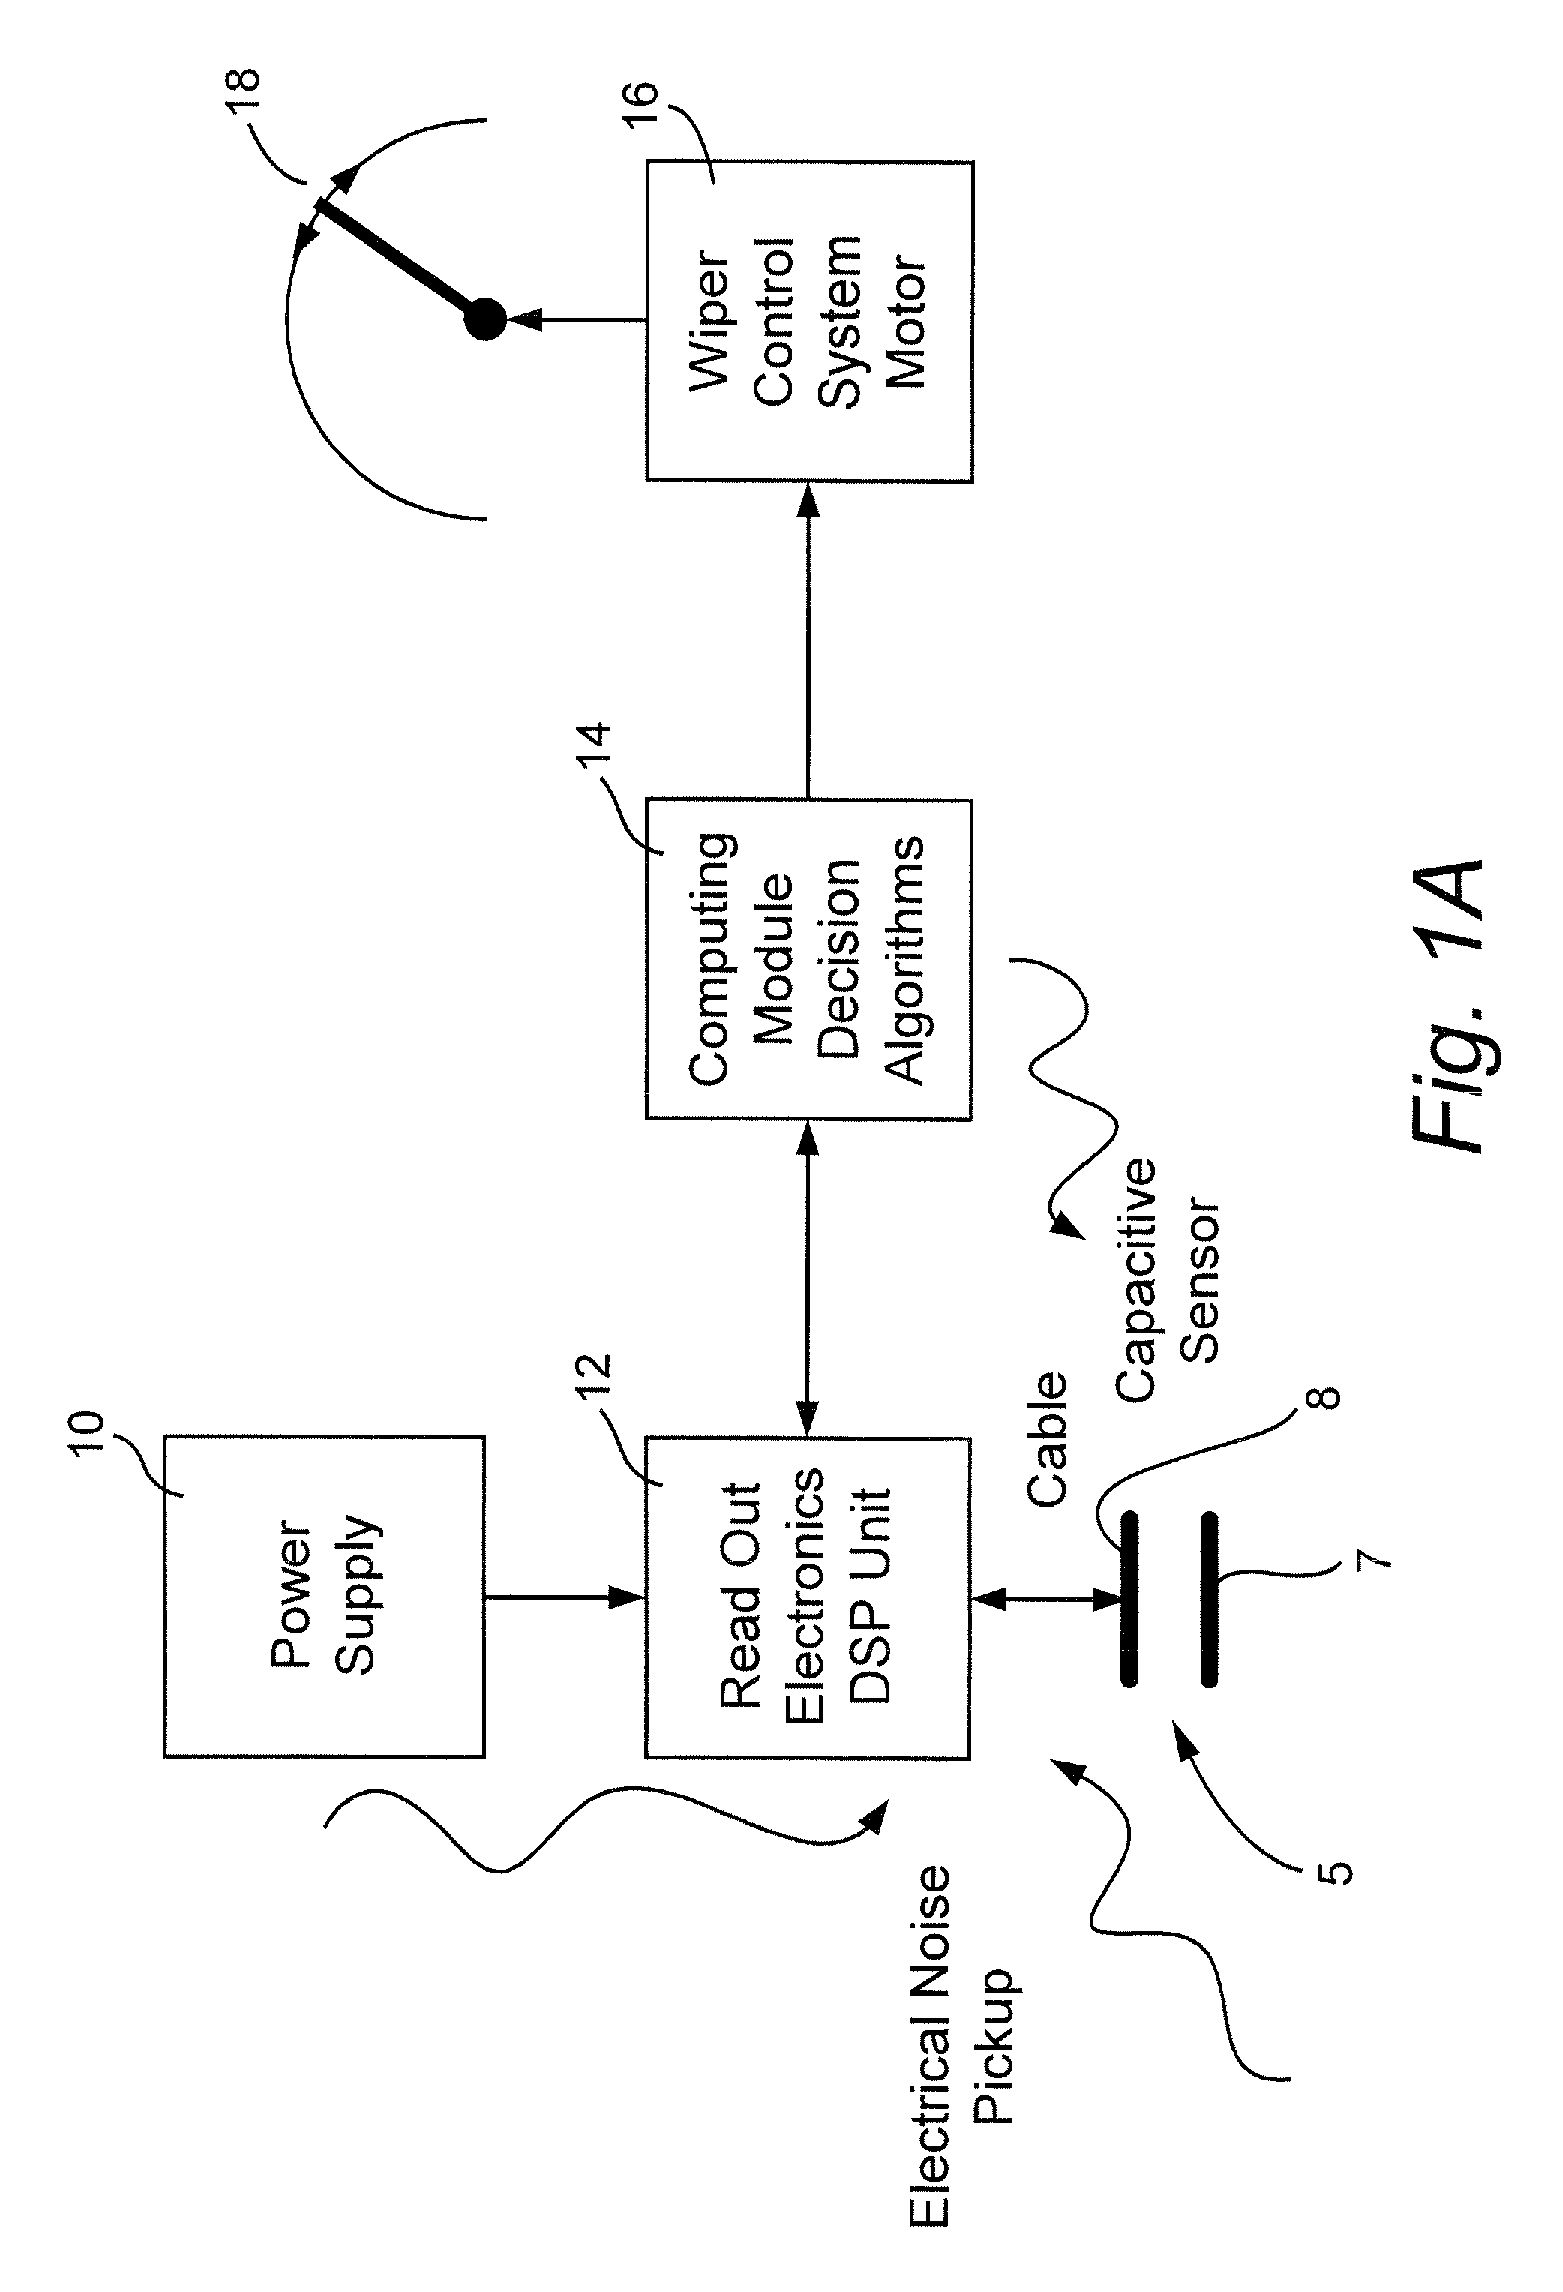 Moisture sensor and/or defogger with Bayesian improvements, and related methods